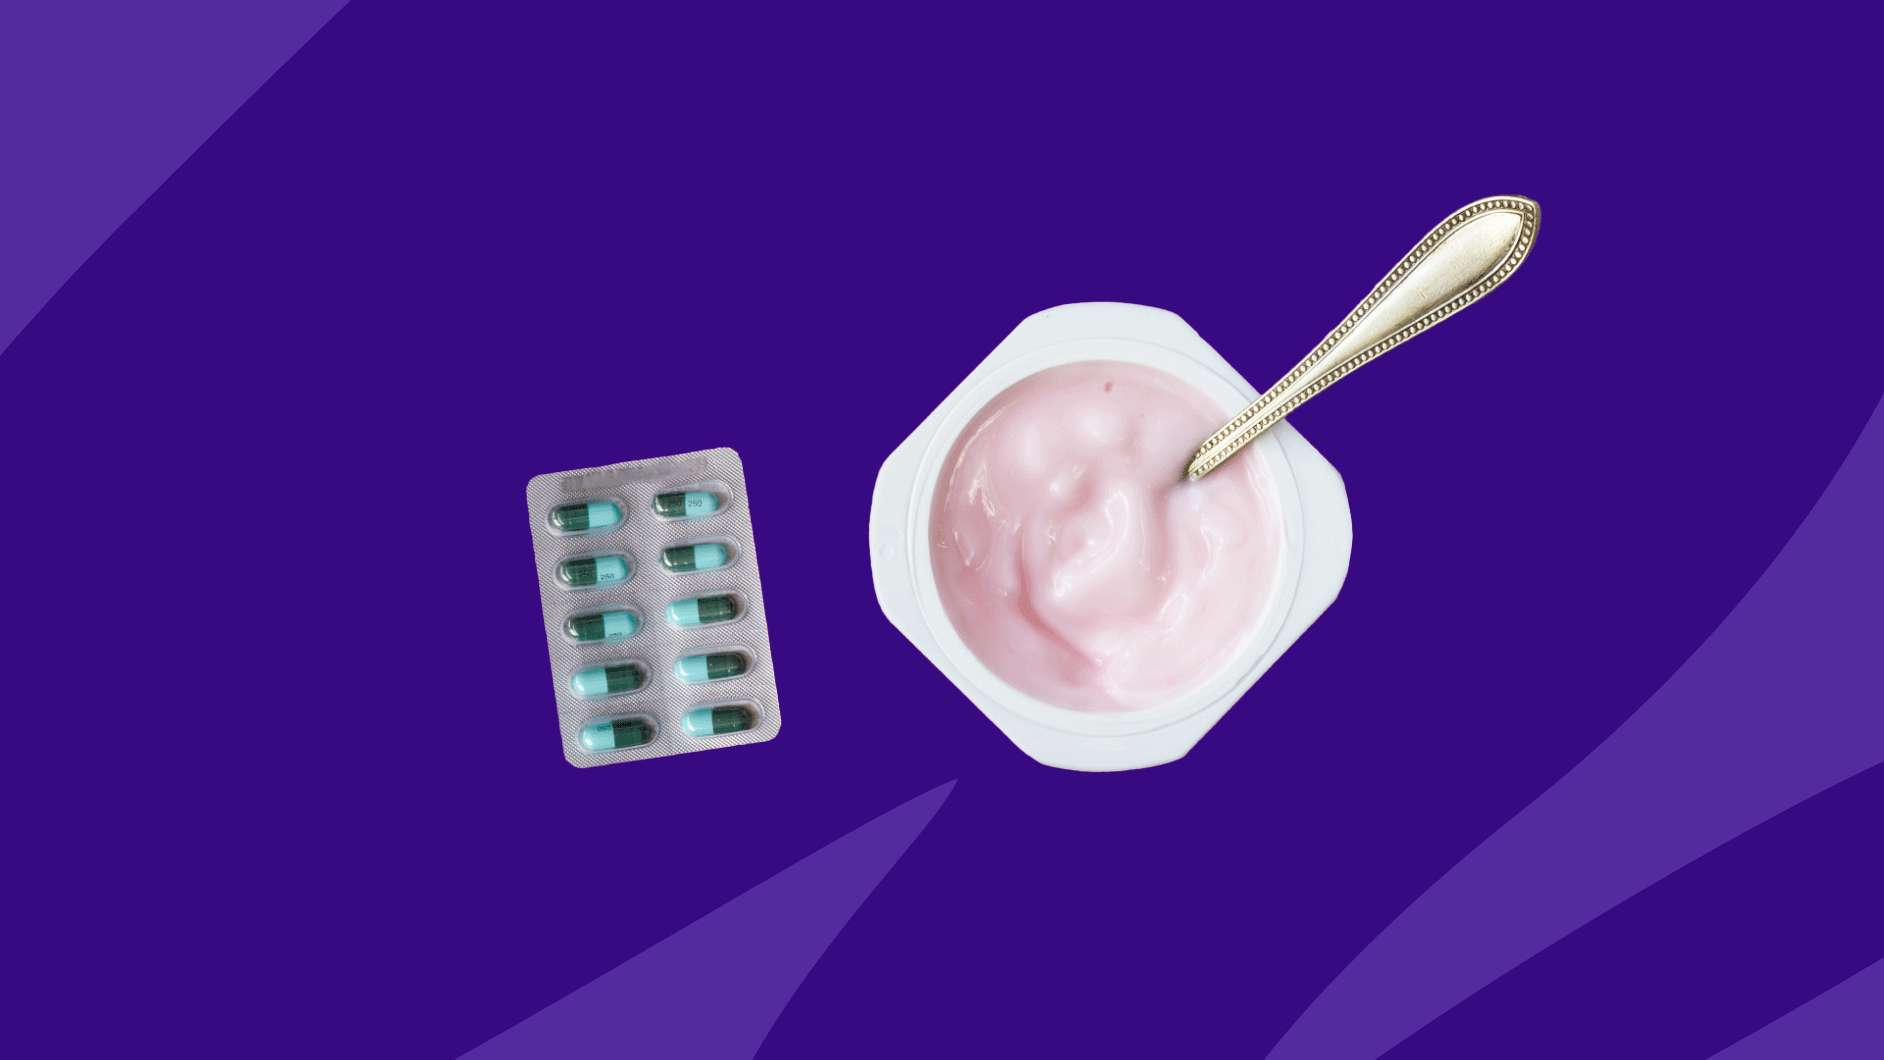 Rx pills and yogurt container with spoon: How to prevent yeast infections